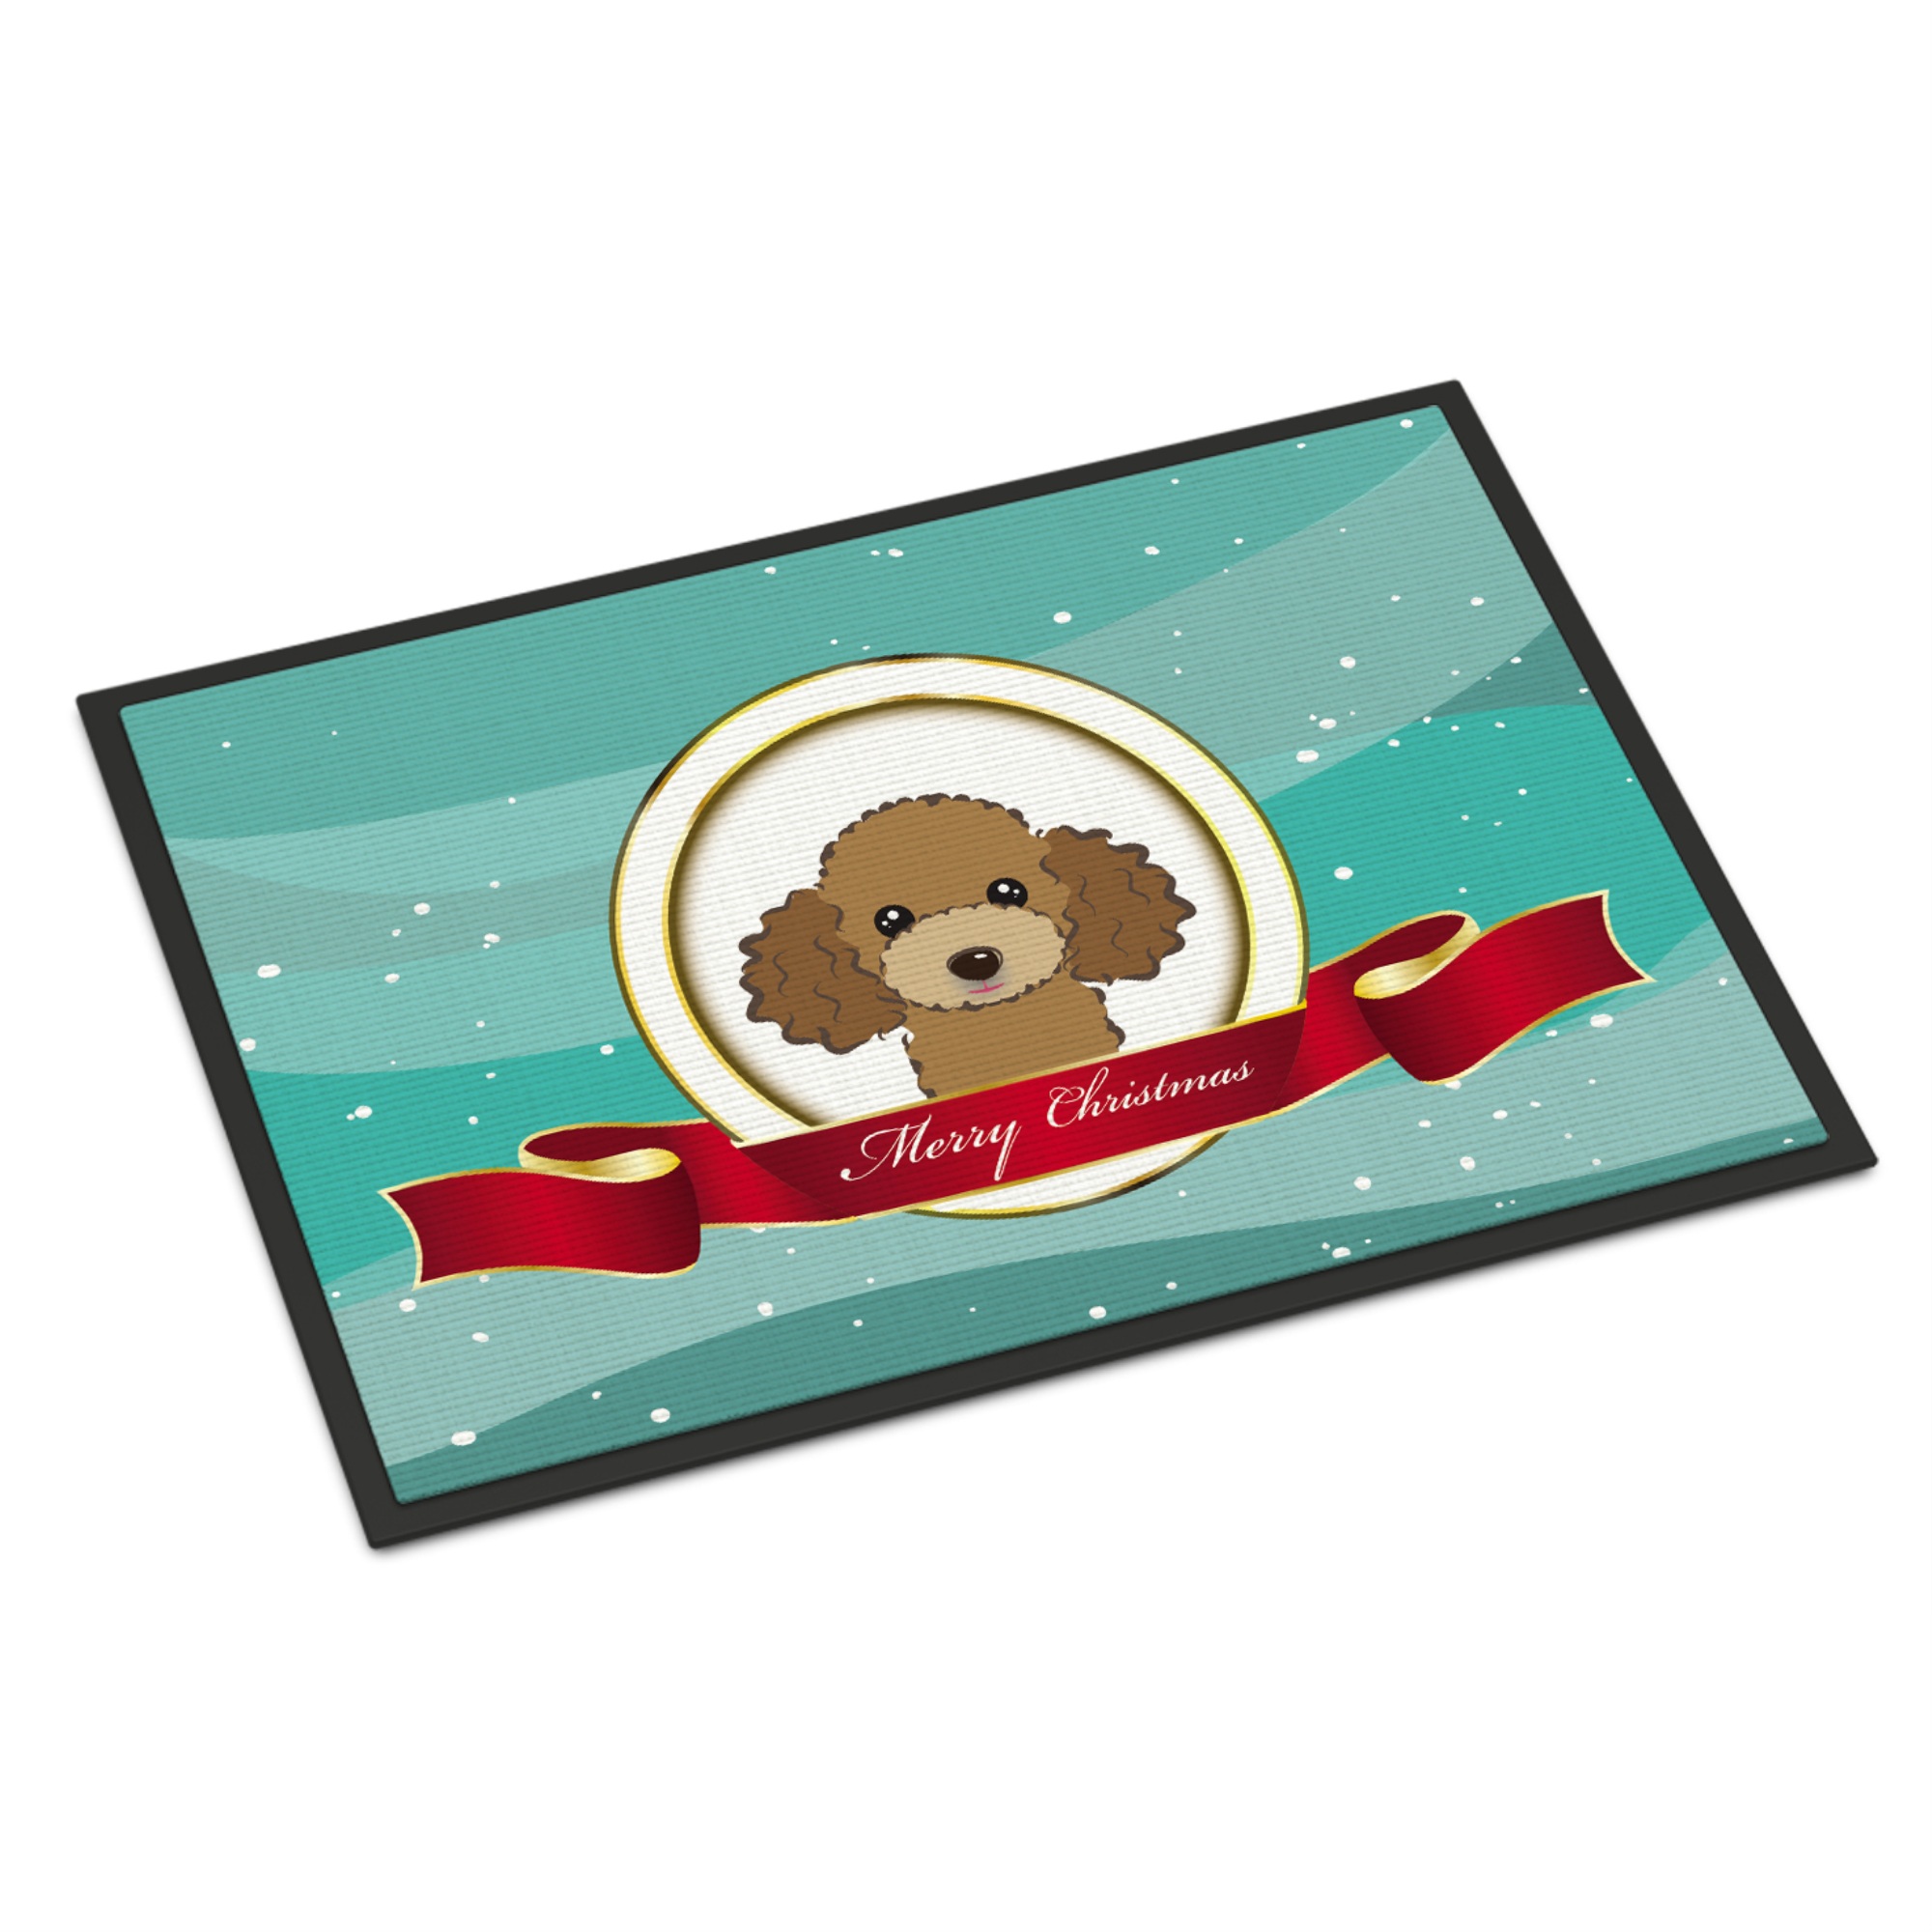 Caroline's Treasures "Caroline's Treasures BB1566JMAT Chocolate Brown Poodle Merry Christmas Indoor or Outdoor Mat, 24"" x 36"", Multicolor"